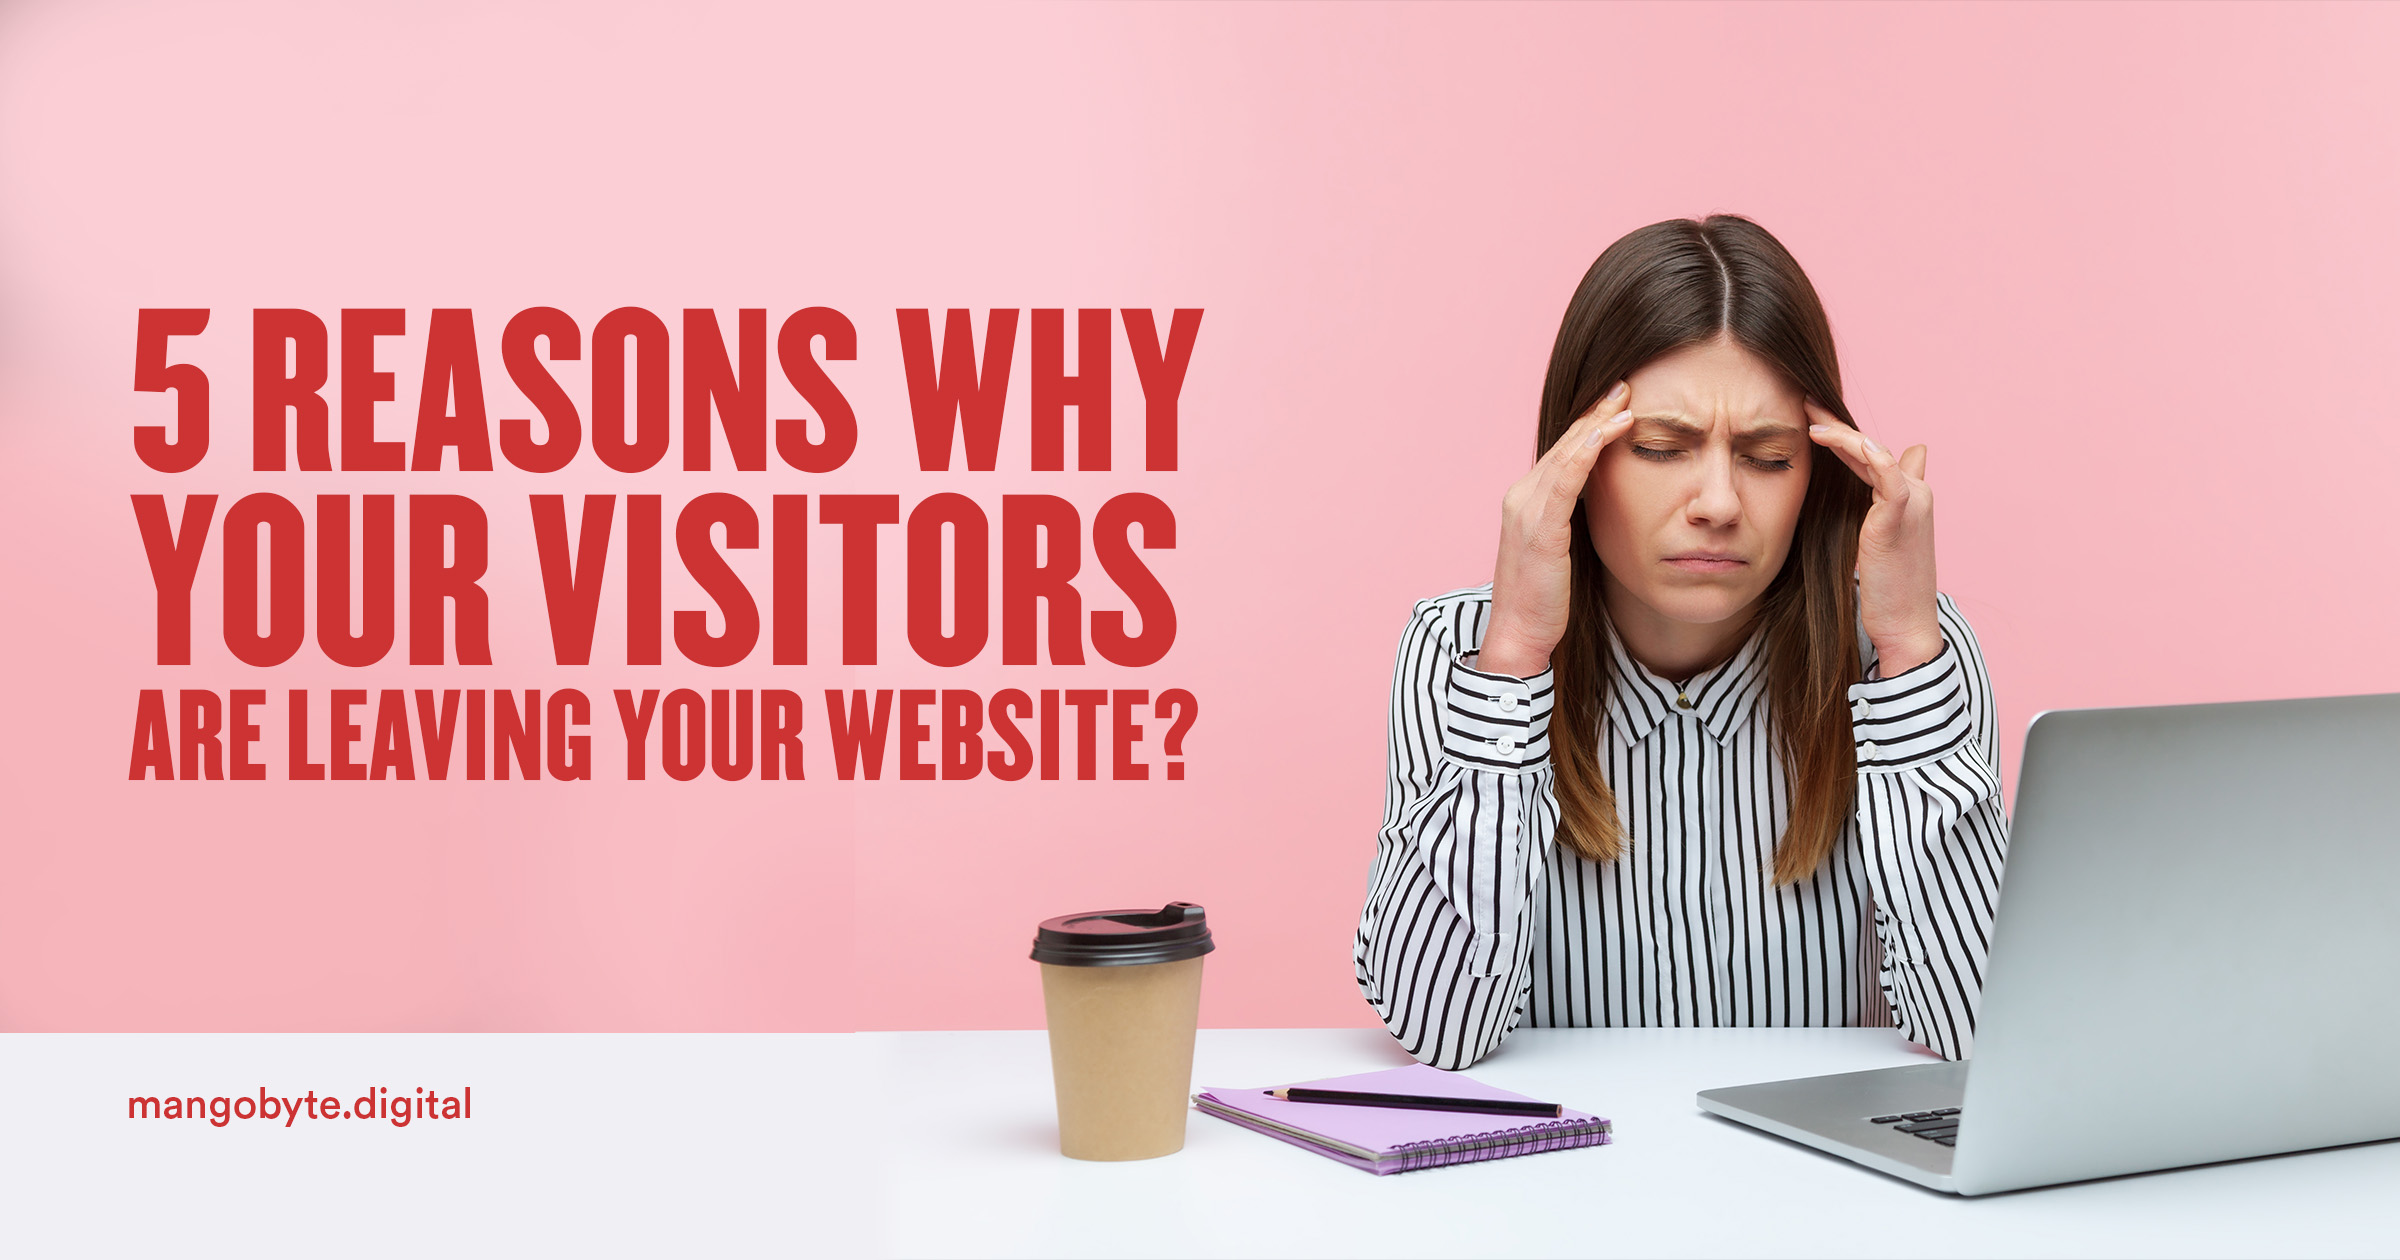 Reasons why visitors are leaving your website